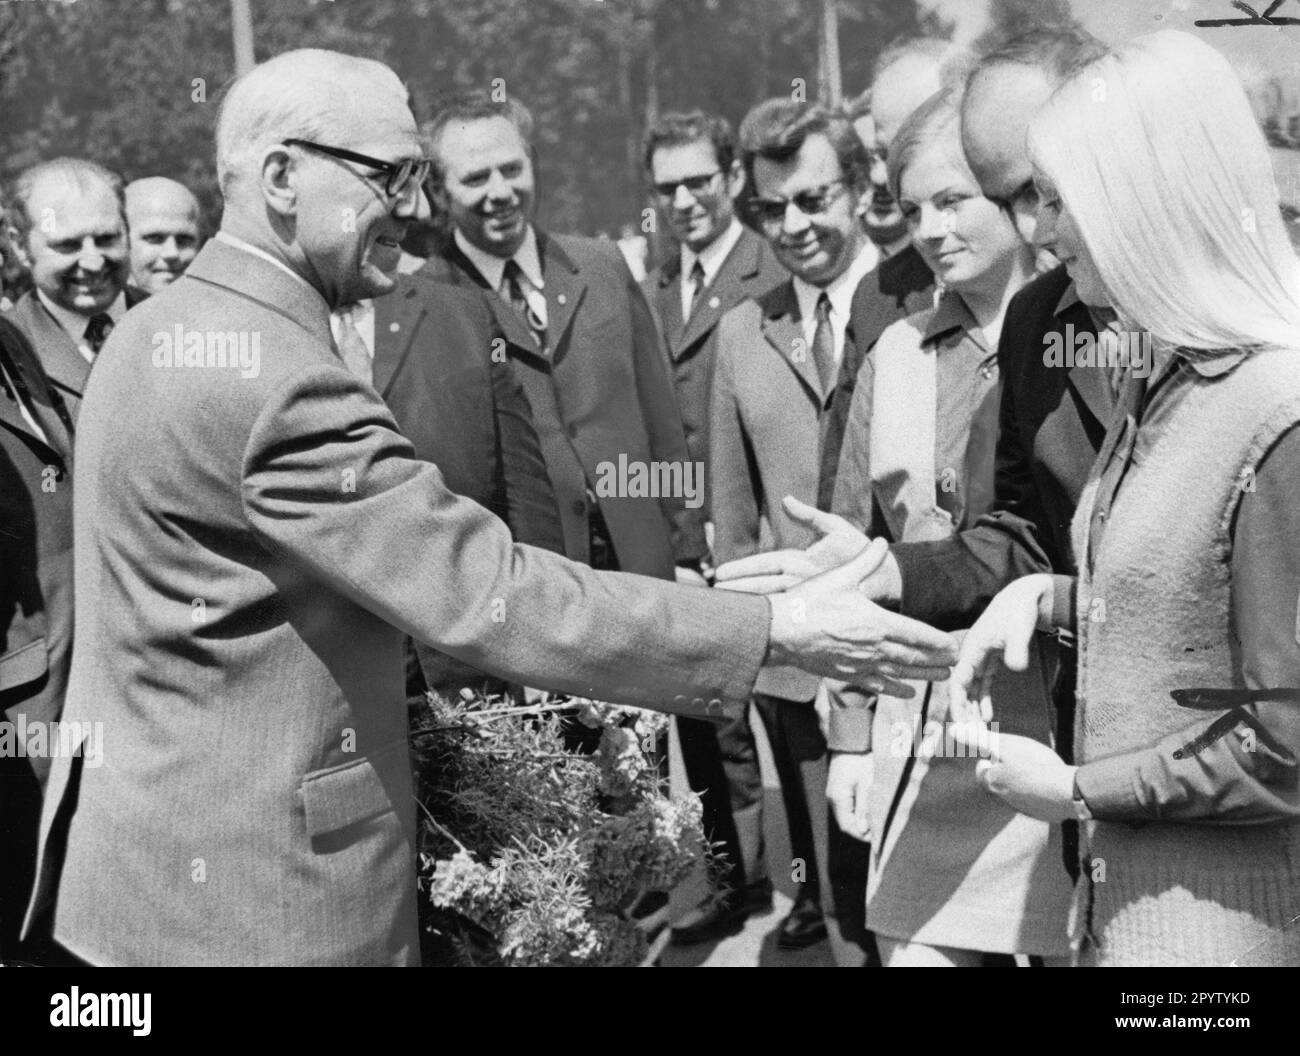 Willi Stoph(l.), Chairman of the Council of Ministers of the GDR visiting the IFA Autowerk Ludwigsfelde.LKW W50.DDR- Betriebe. Photo: MAZ/Lutz Sperling, 15.06.1972 [automated translation] Stock Photo